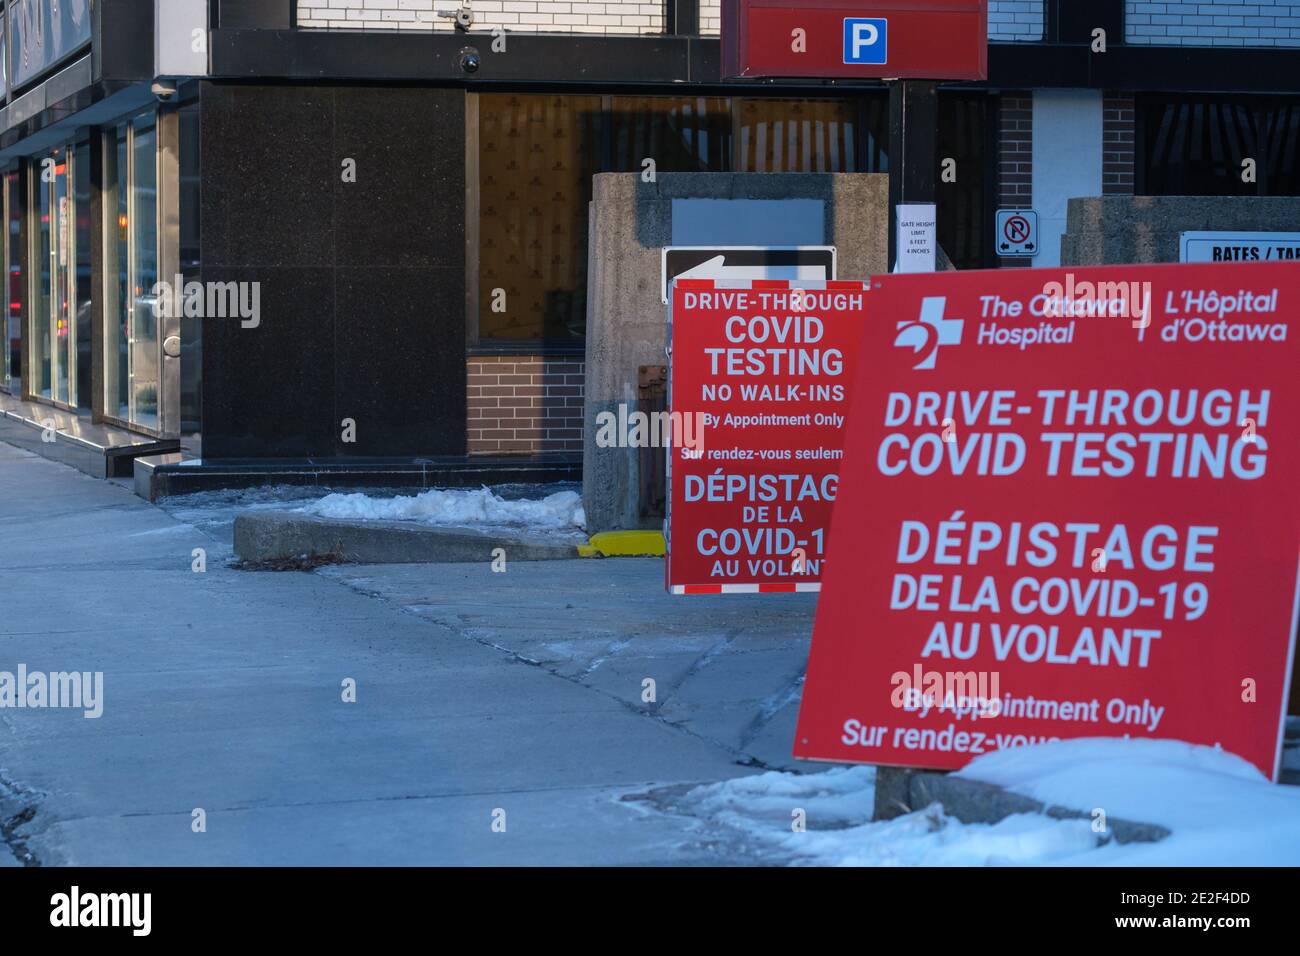 Ottawa, Ontario, Canada - January 8, 2021: Signs at 63 Albert St. direct drivers to drive-through COVID-19 testing conducted by The Ottawa Hospital in Stock Photo